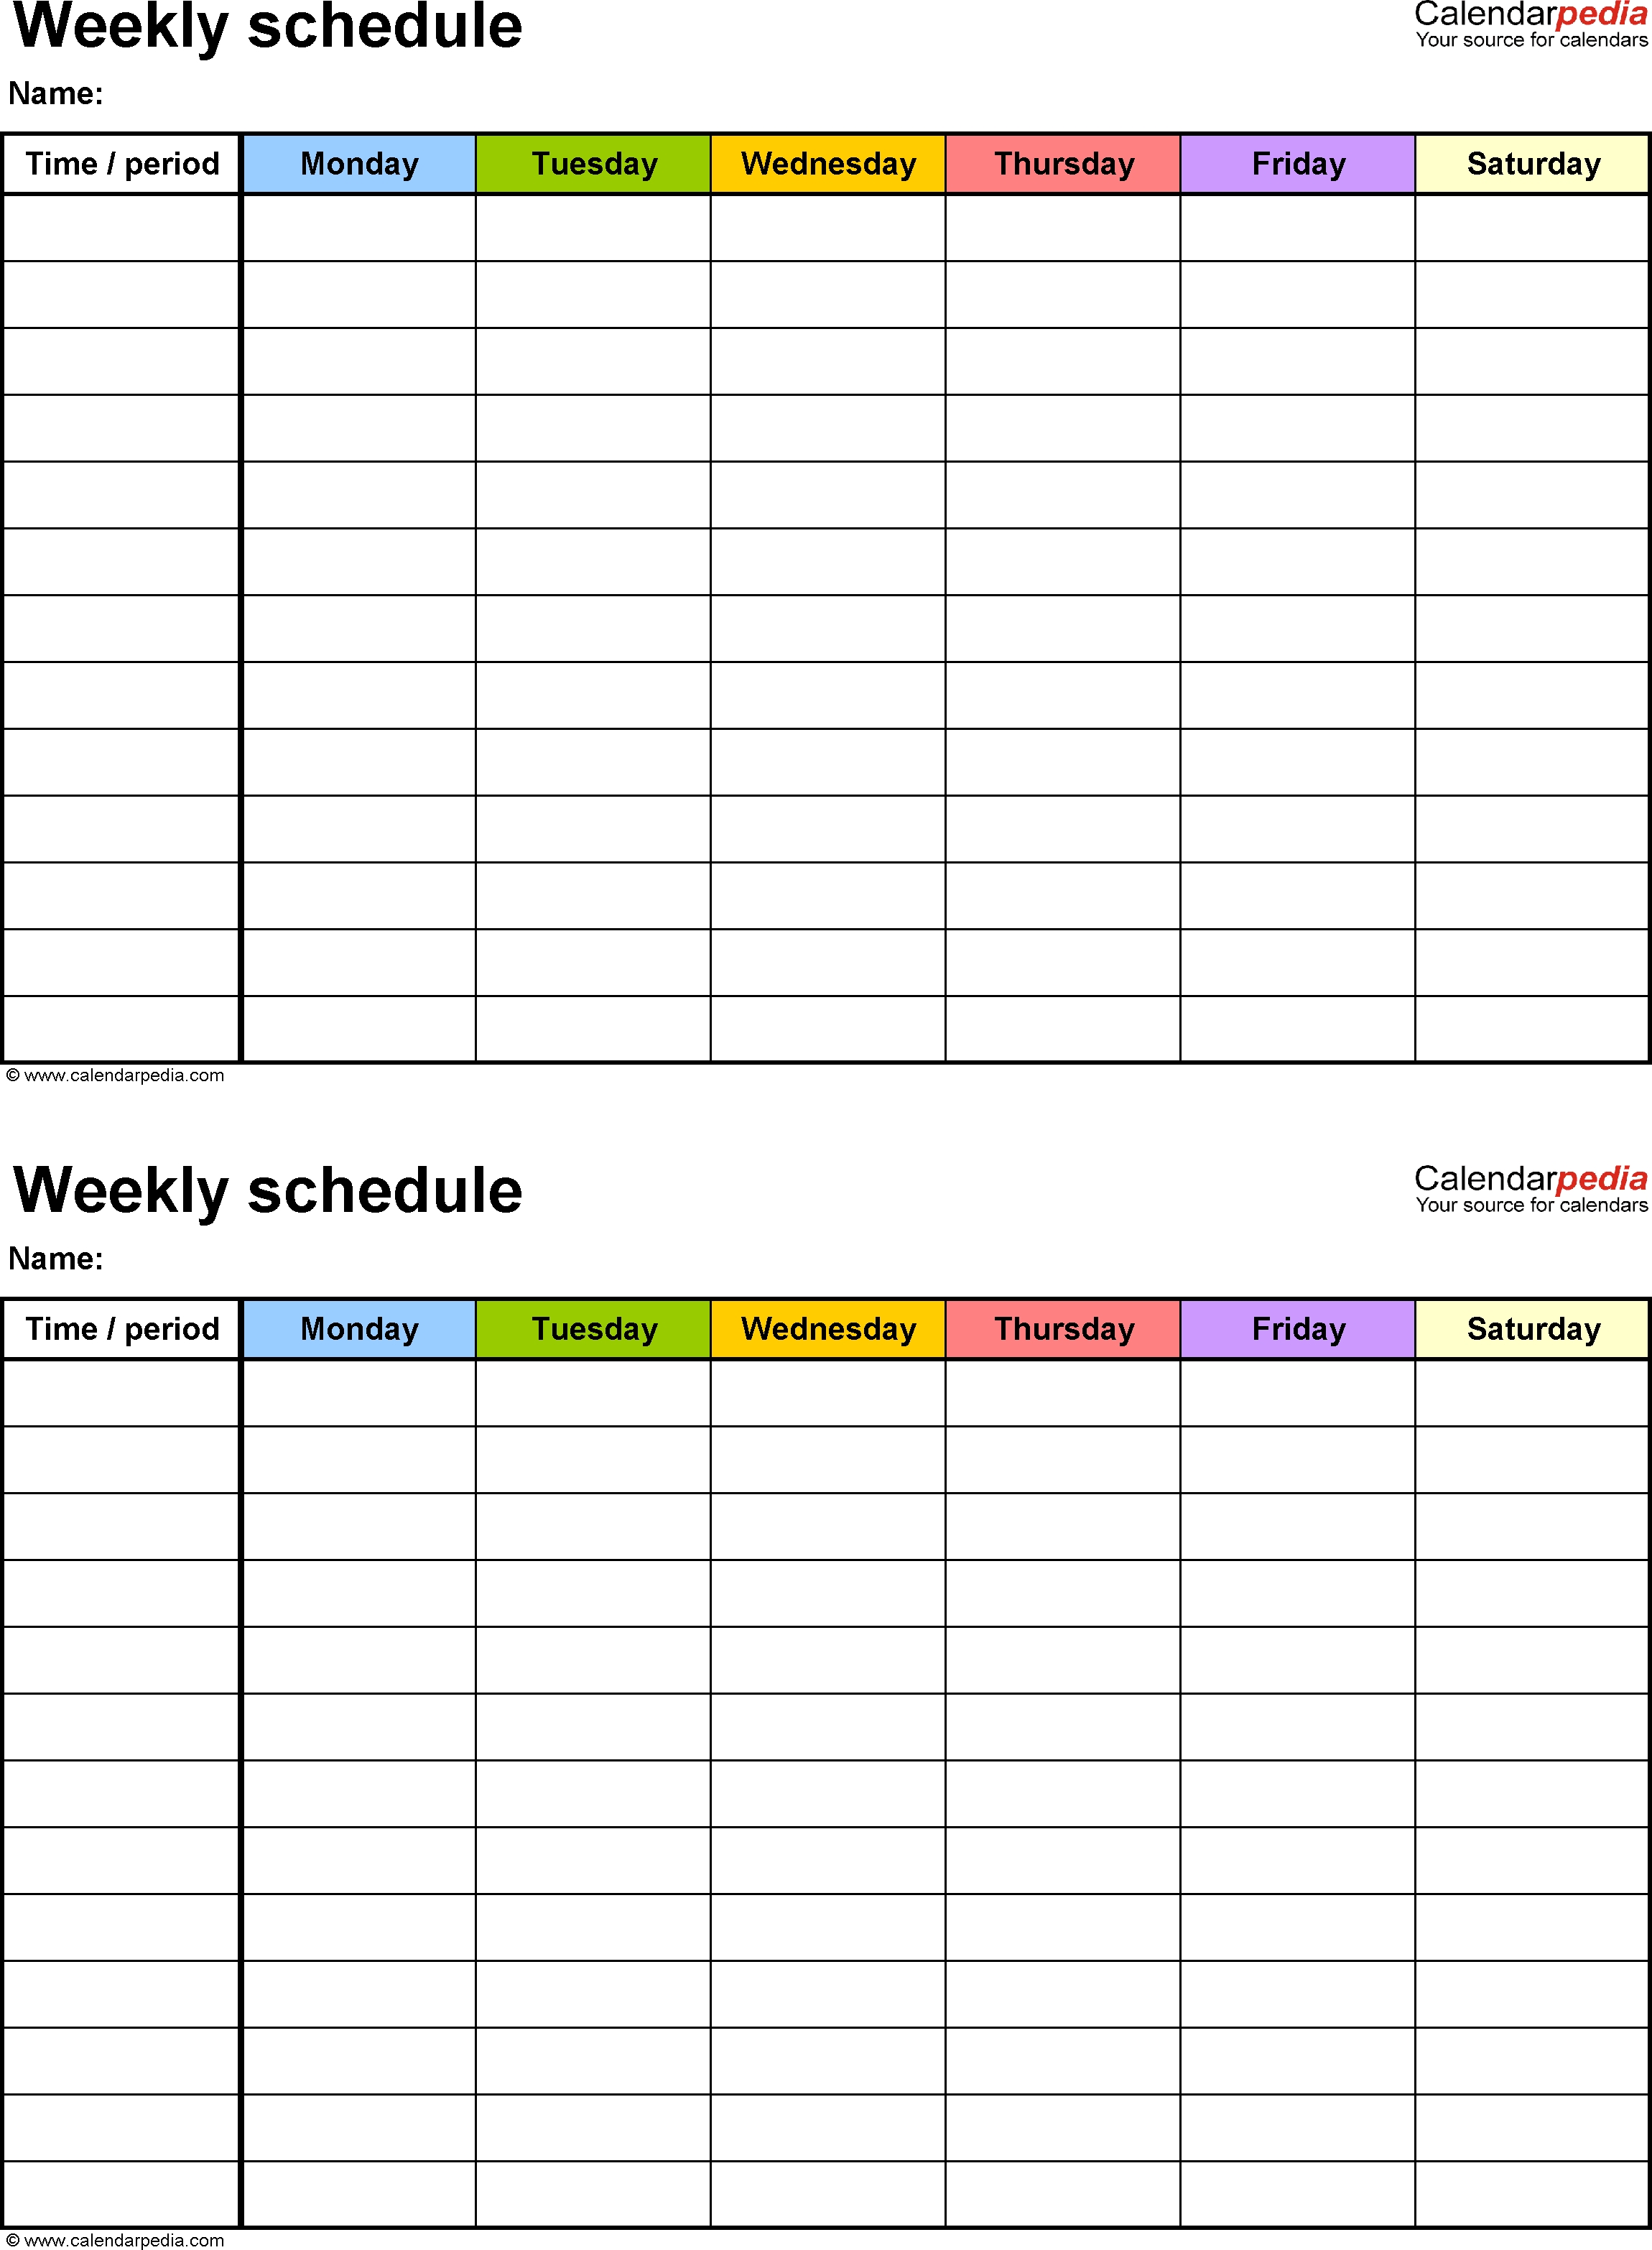 Free Weekly Schedule Templates For Word - 18 Templates with 7 Day Week Calendar Template